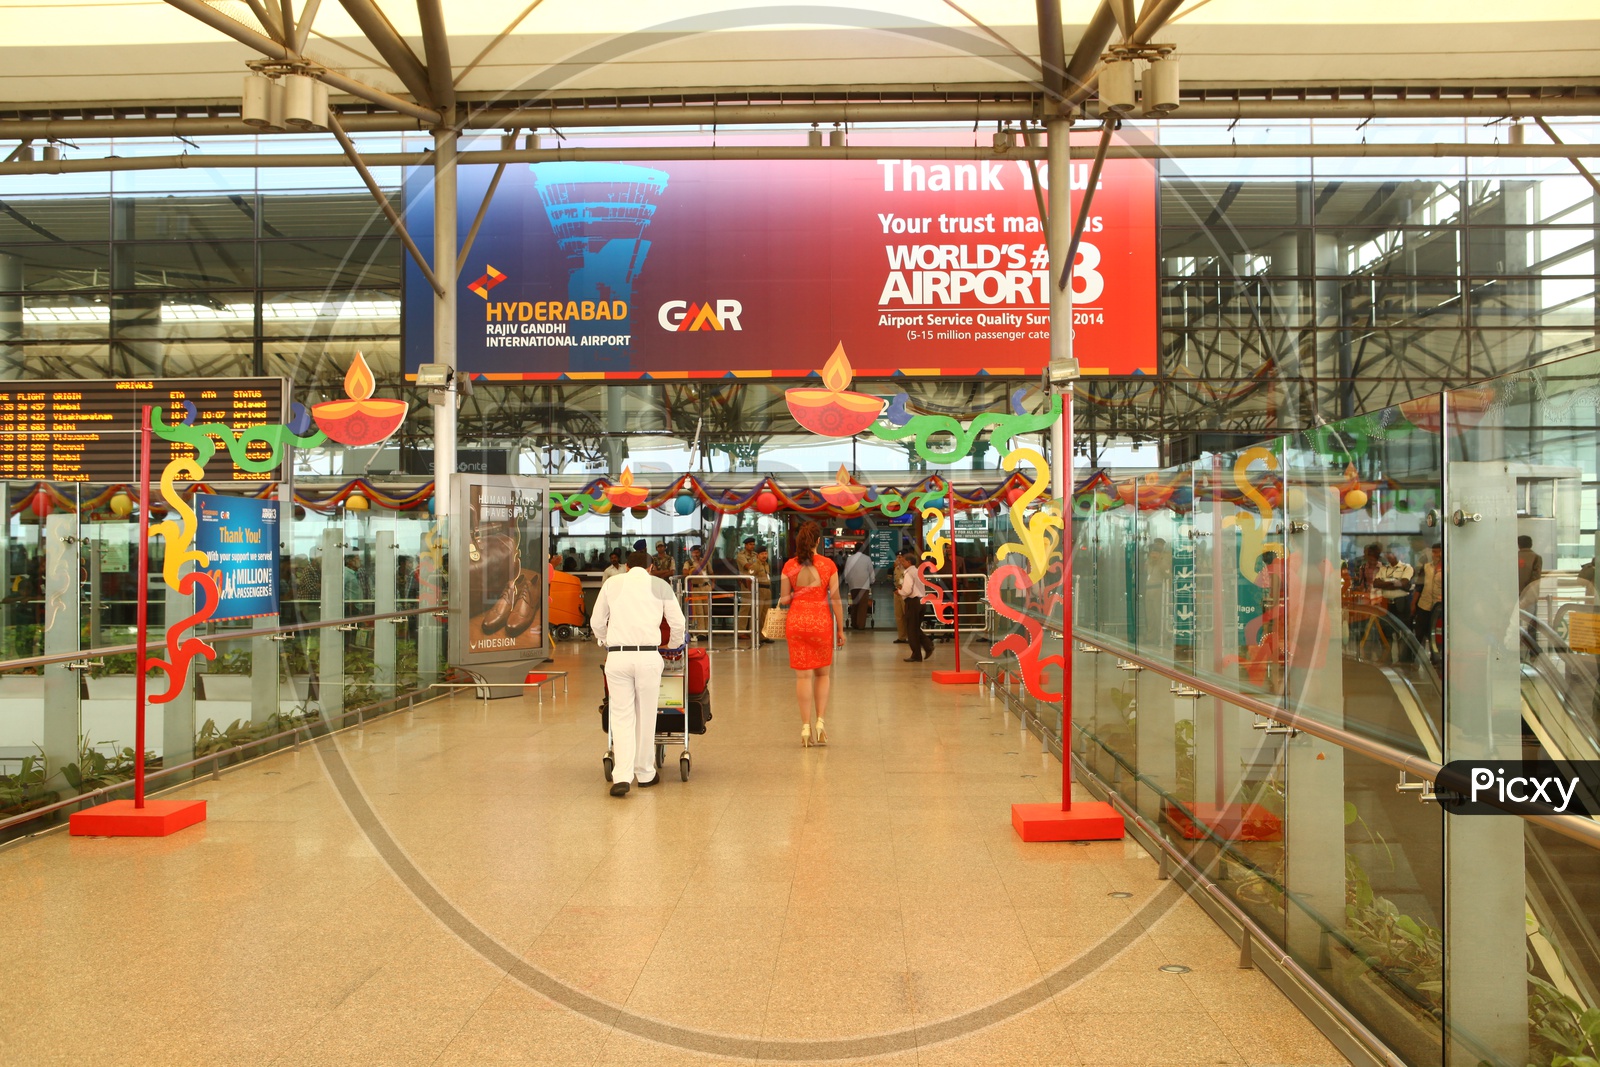 RGIA Airport Entrance With Passenger Travel Scenes